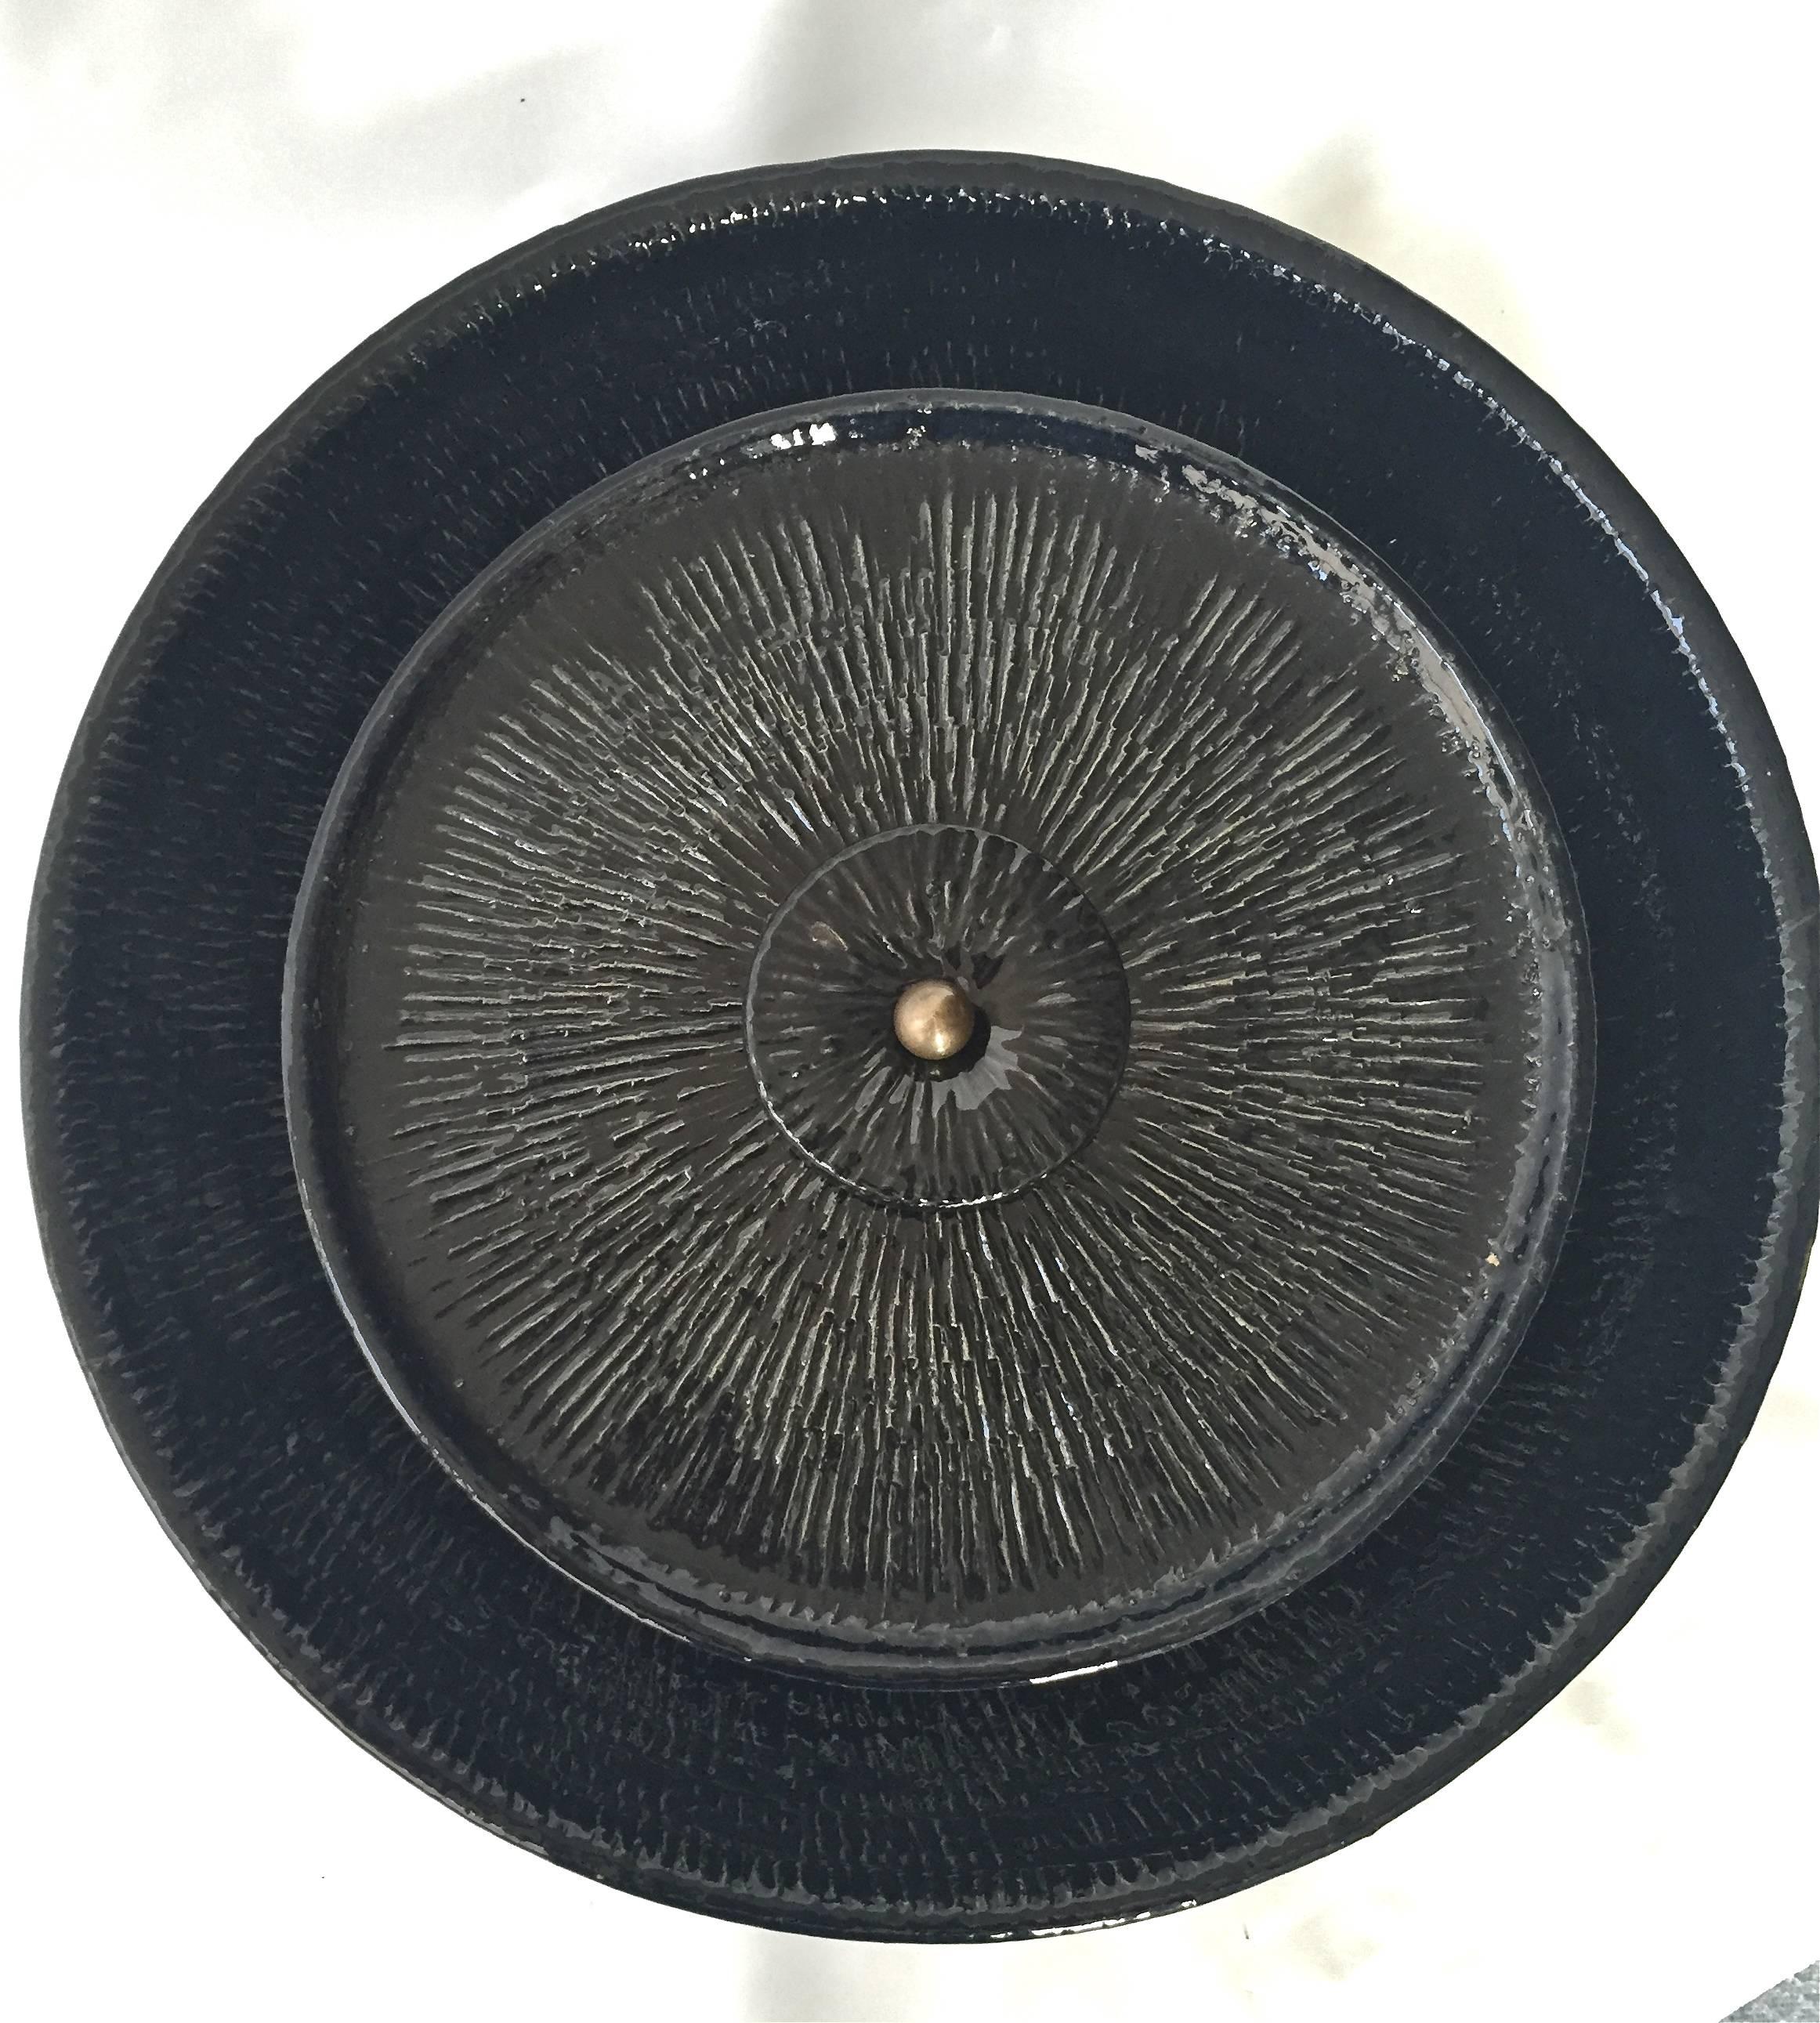 Vintage, dark blue glaze ceramic wall light, Denmark. Marked on back: SEP 411. Existing wiring, rewiring available upon request.